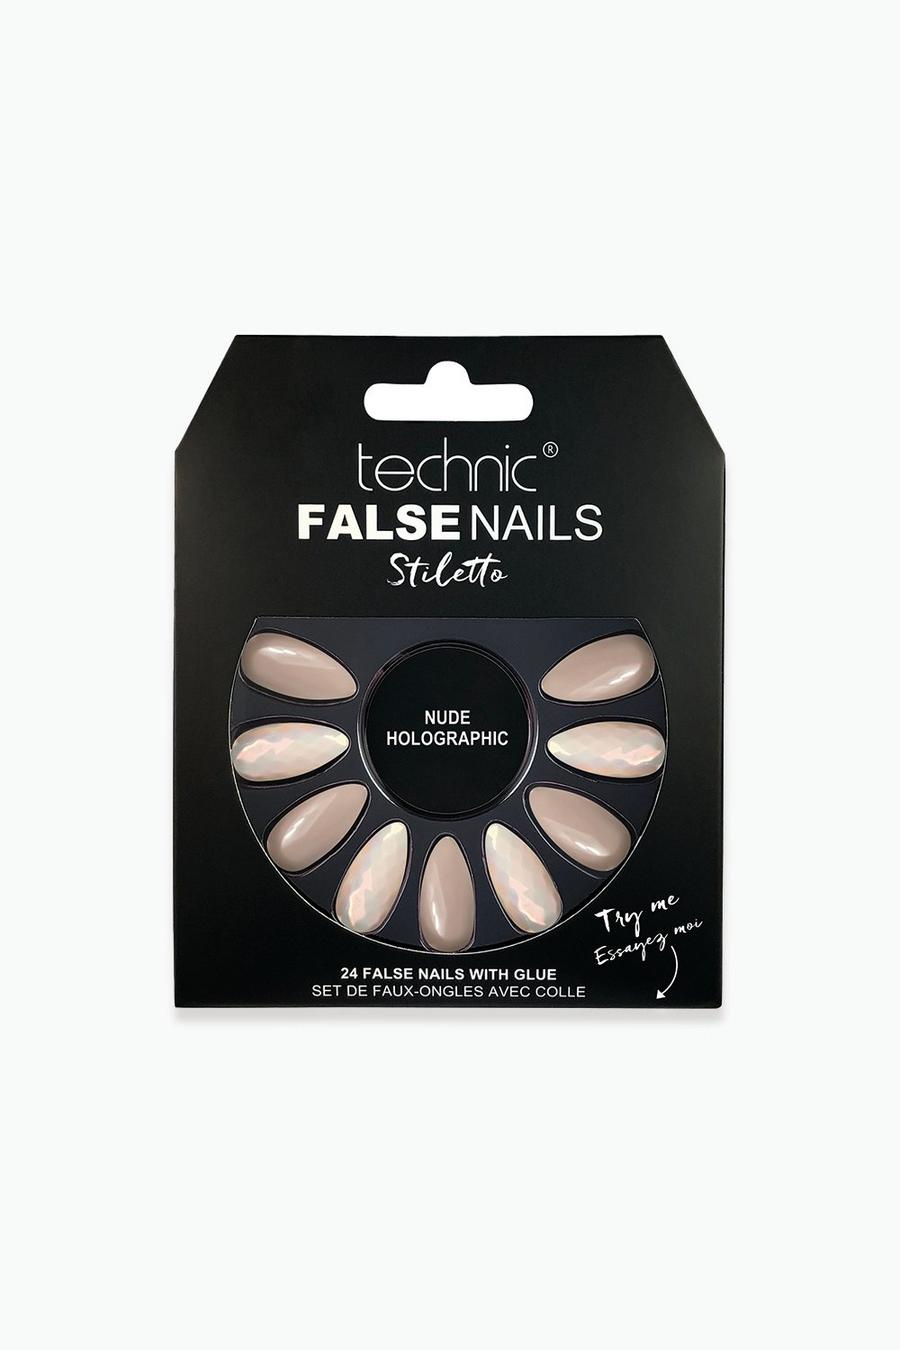 Technic - Faux ongles Stiletto - Nude Holographic, 02 nude image number 1